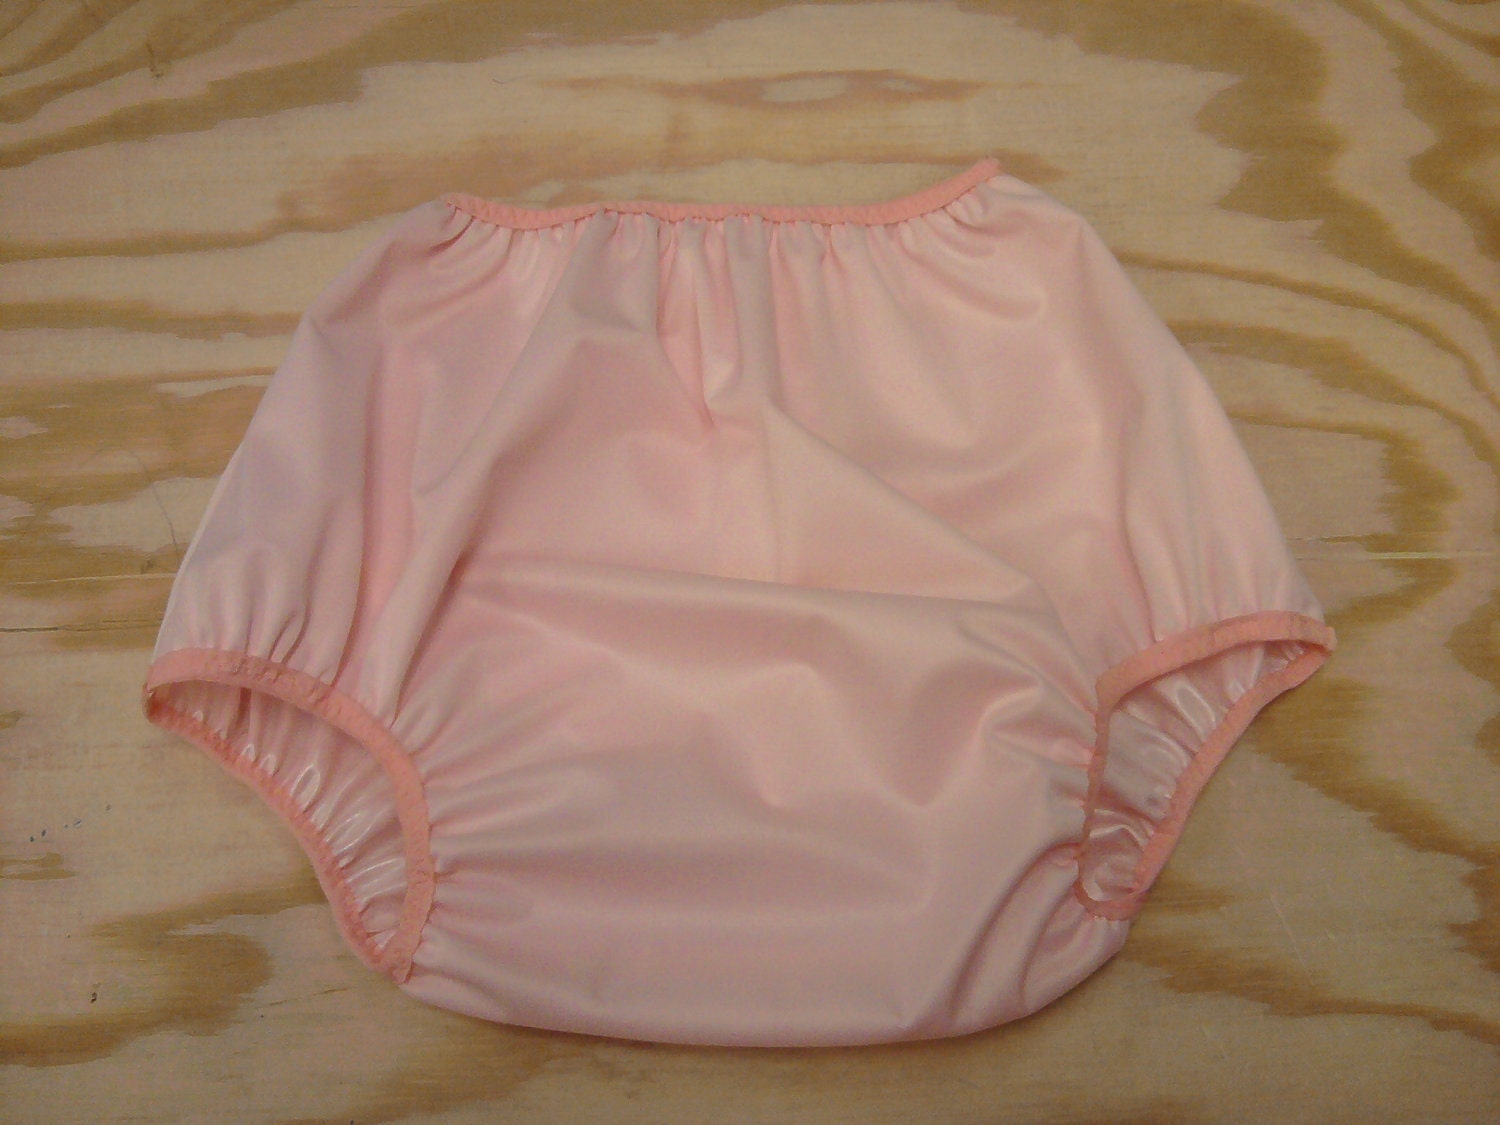 Adult Diaper Cover Pink Size 28 to 36 inches